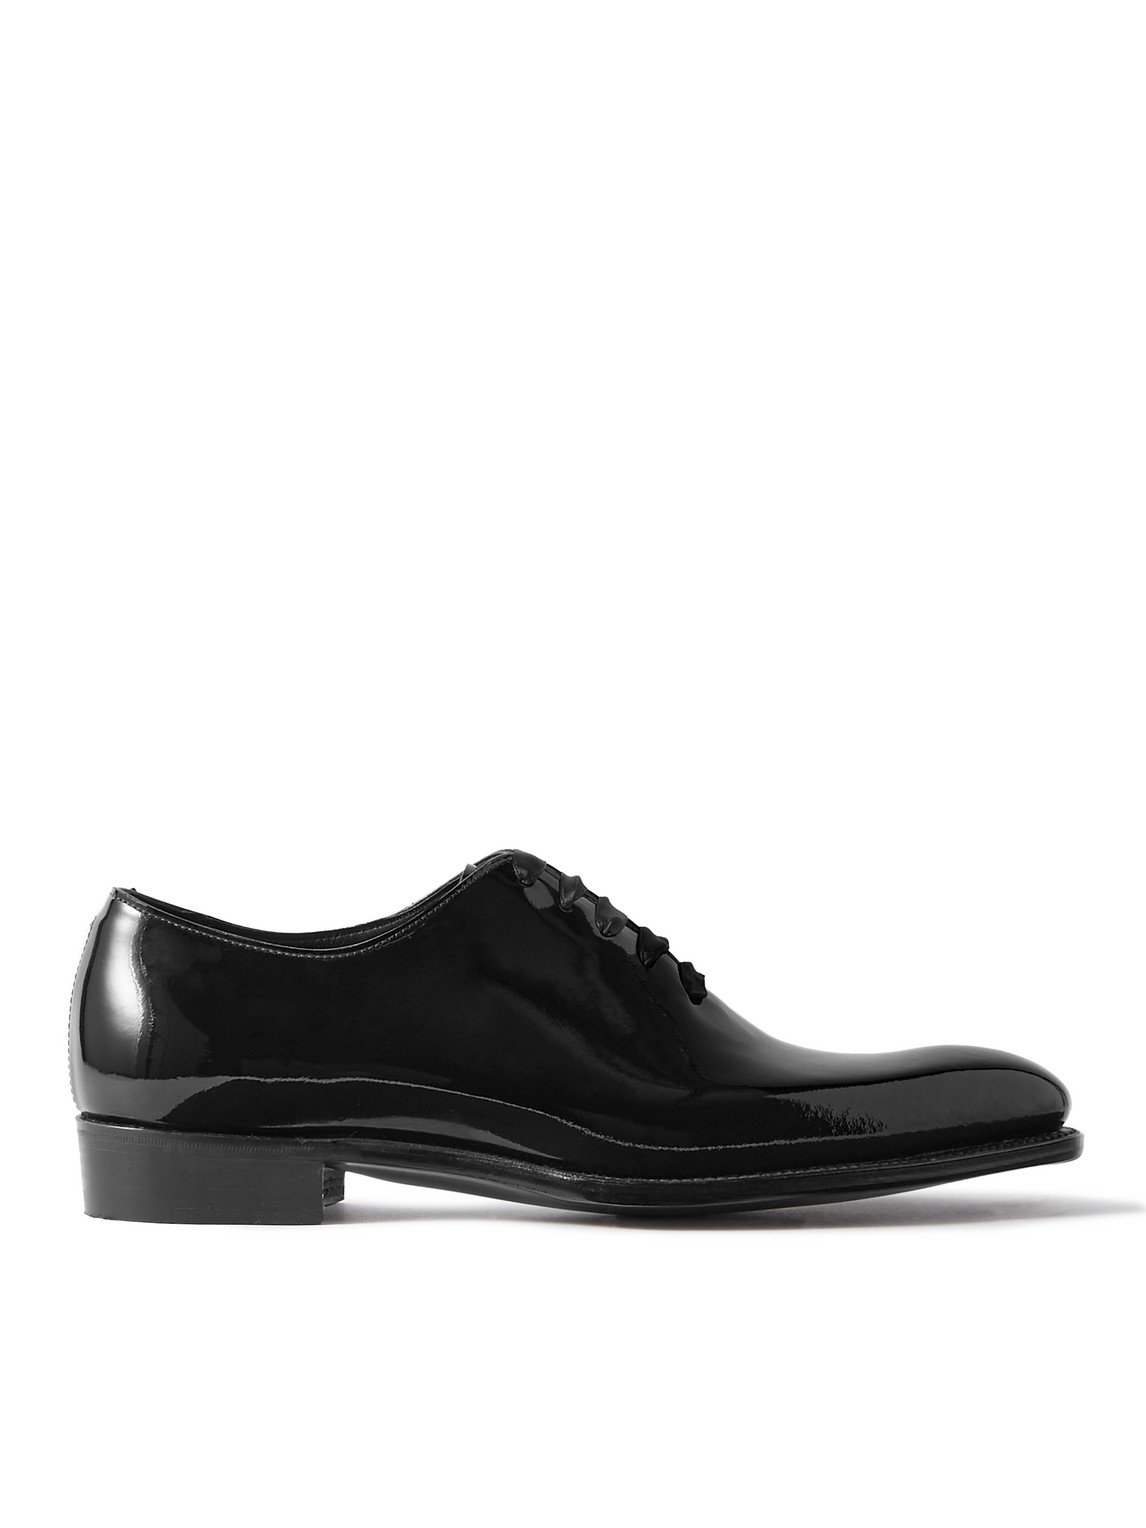 Merlin Whole-Cut Patent-Leather Oxford Shoes